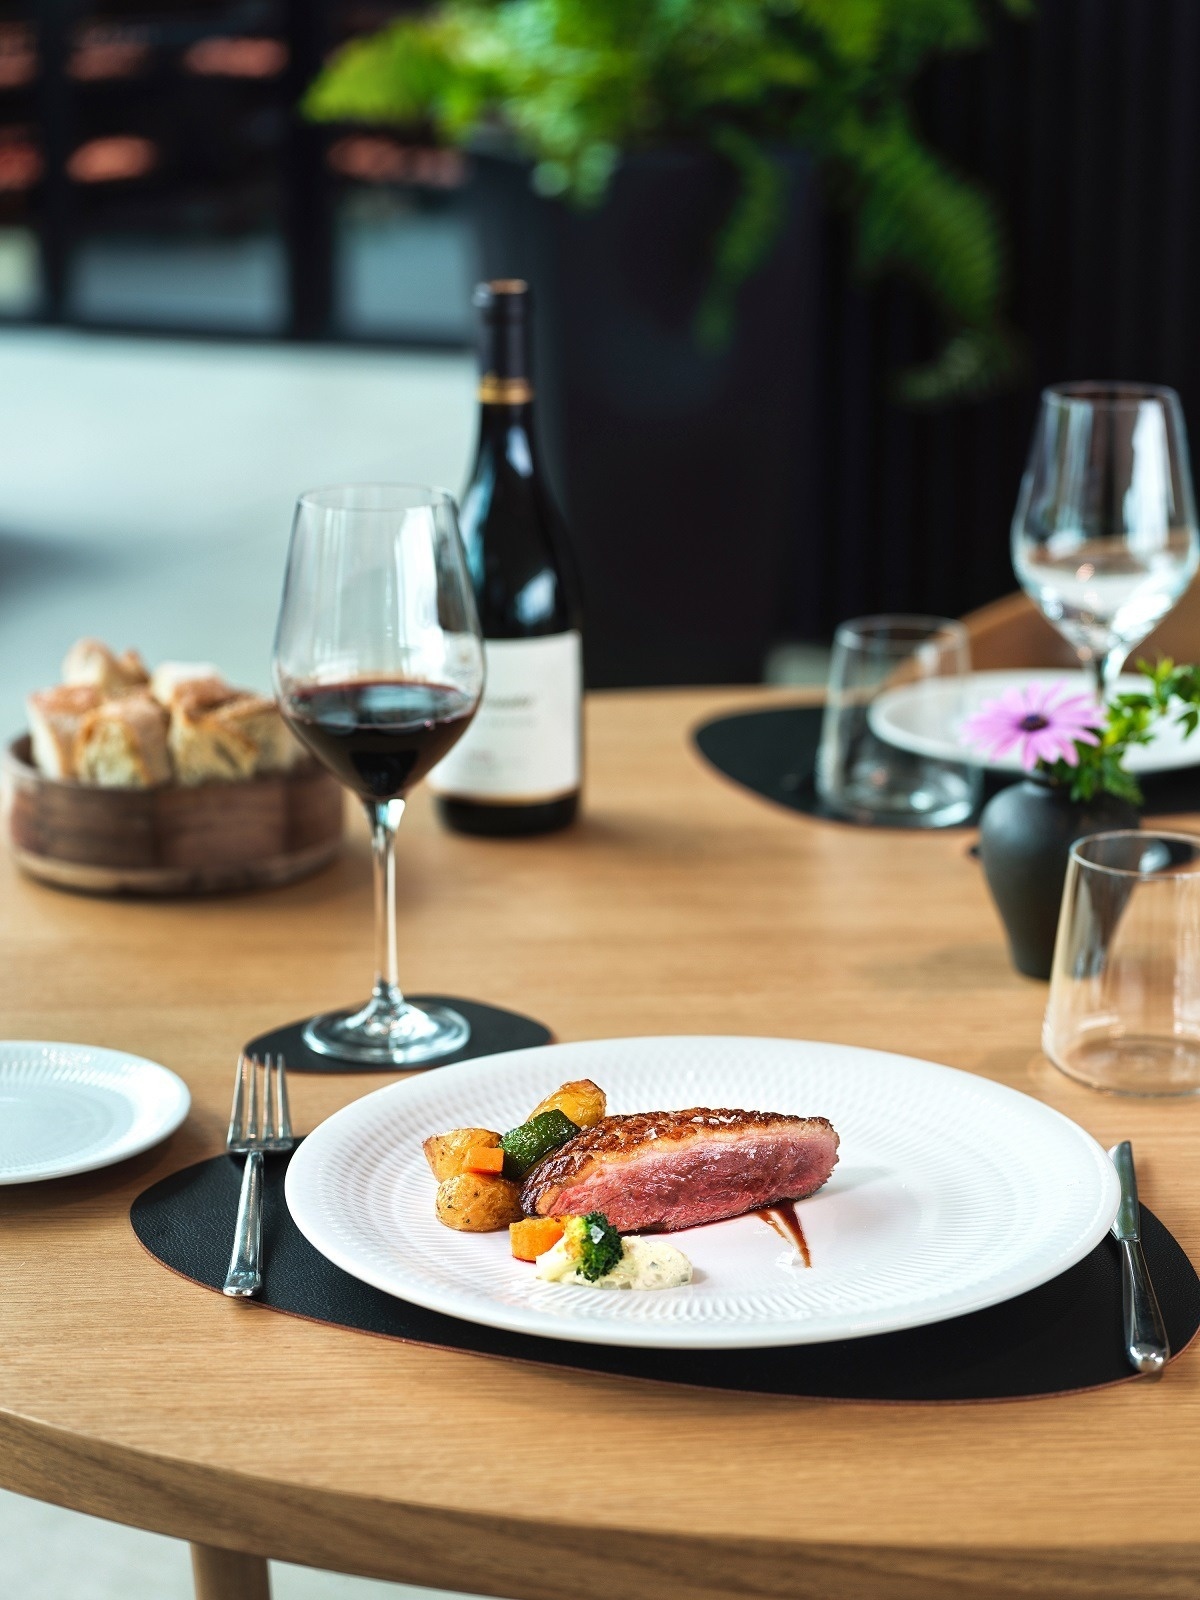 a bottle of wine sits on a table next to a plate of food